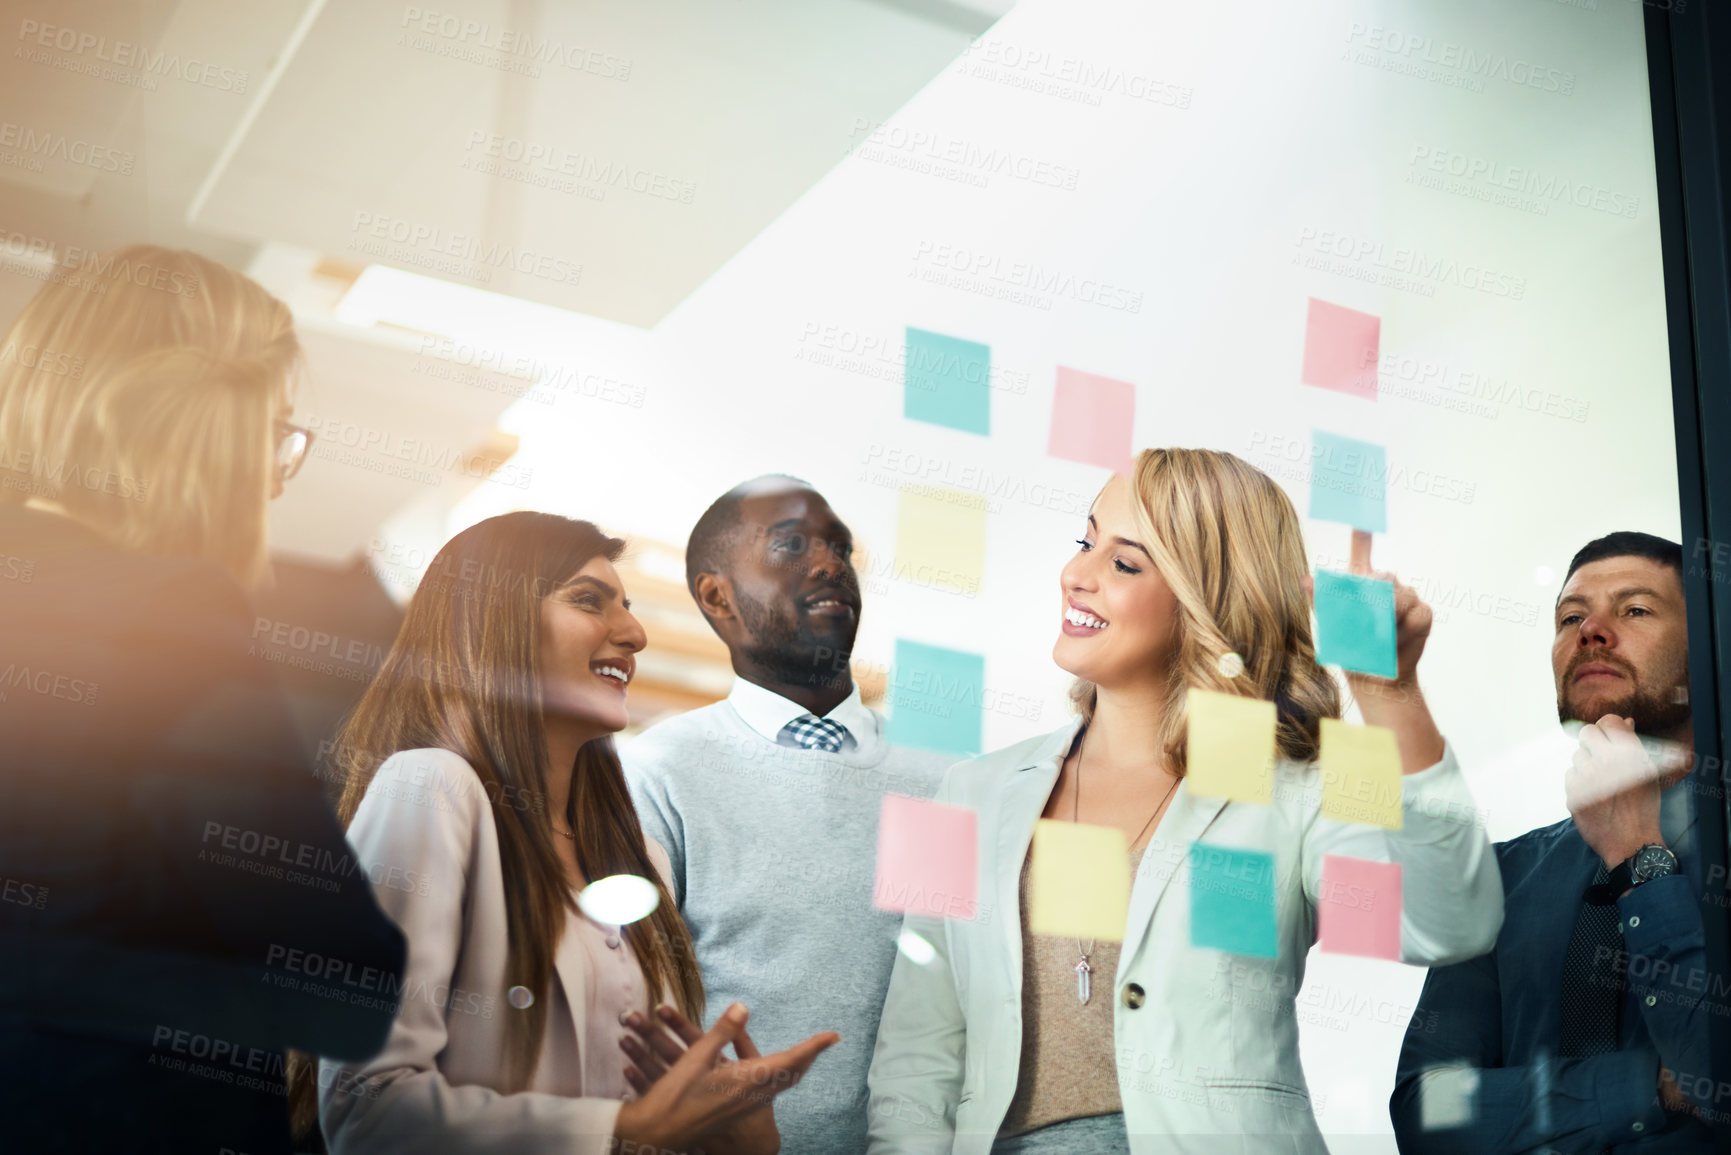 Buy stock photo Shot of a group of businesspeople arranging sticky notes on a glass wall in a modern office